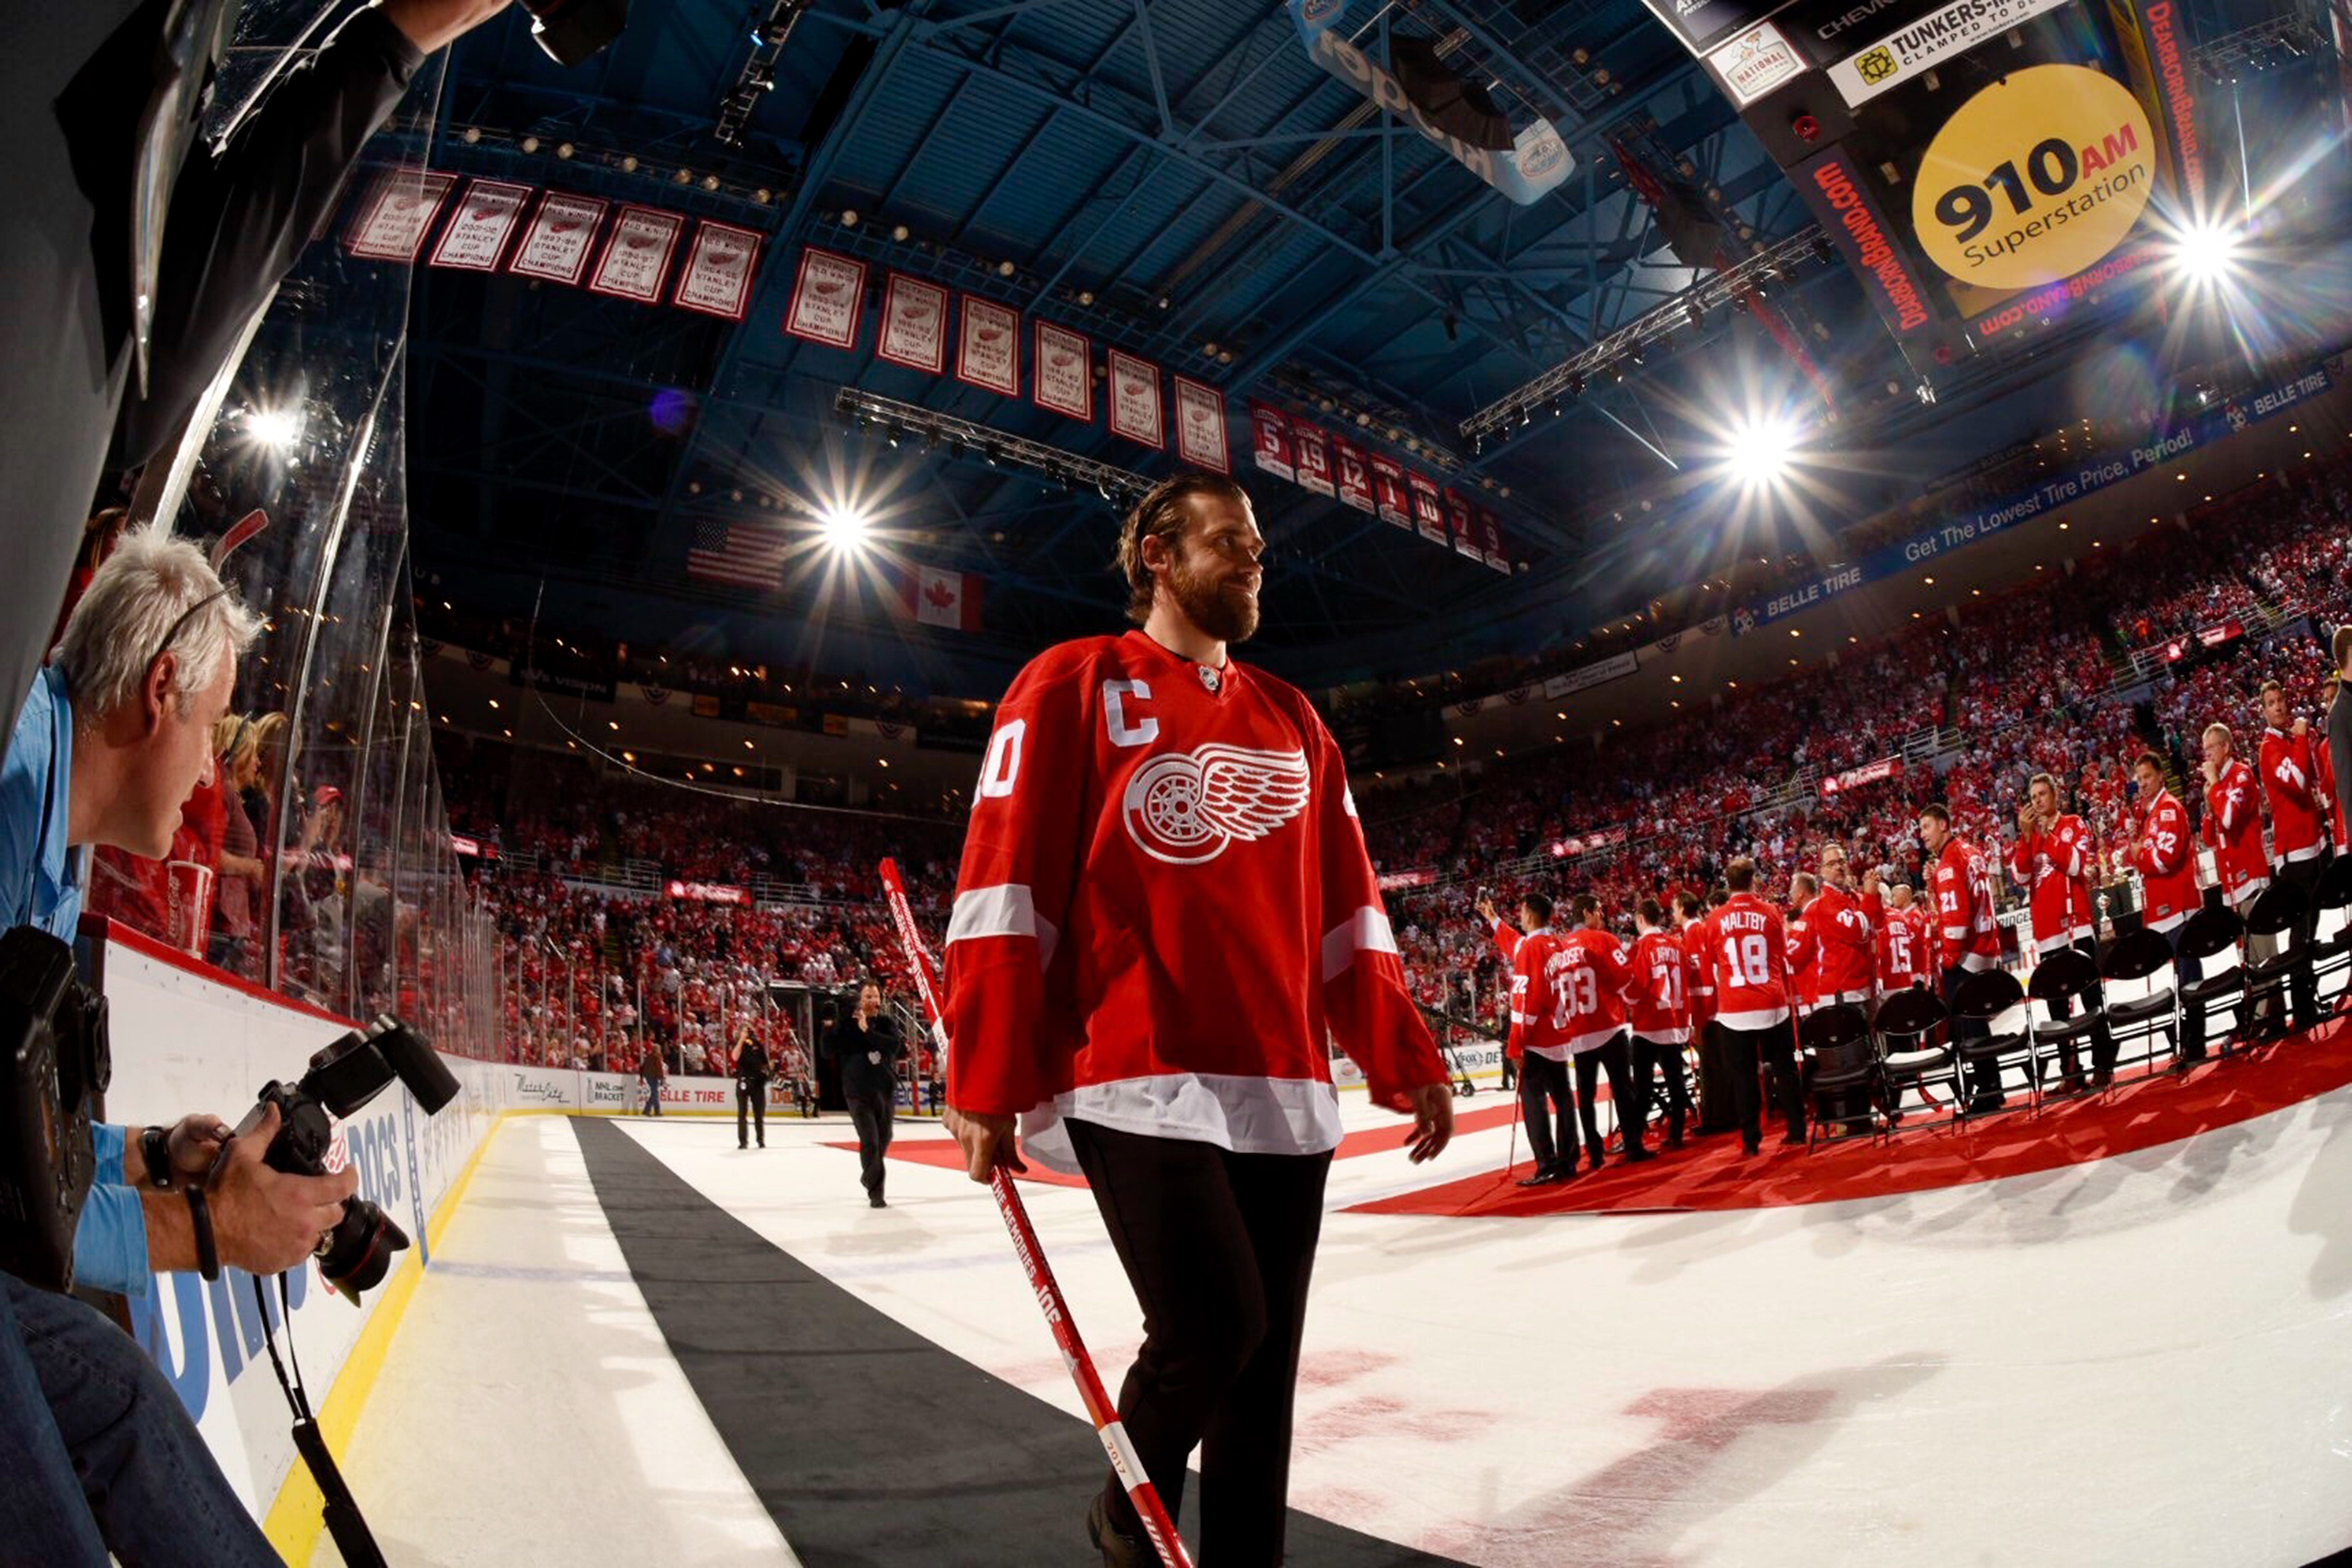 Red Wing captain Henrik Zetterberg is introduced at the postgame ceremony during the final game at Joe Louis Arena.